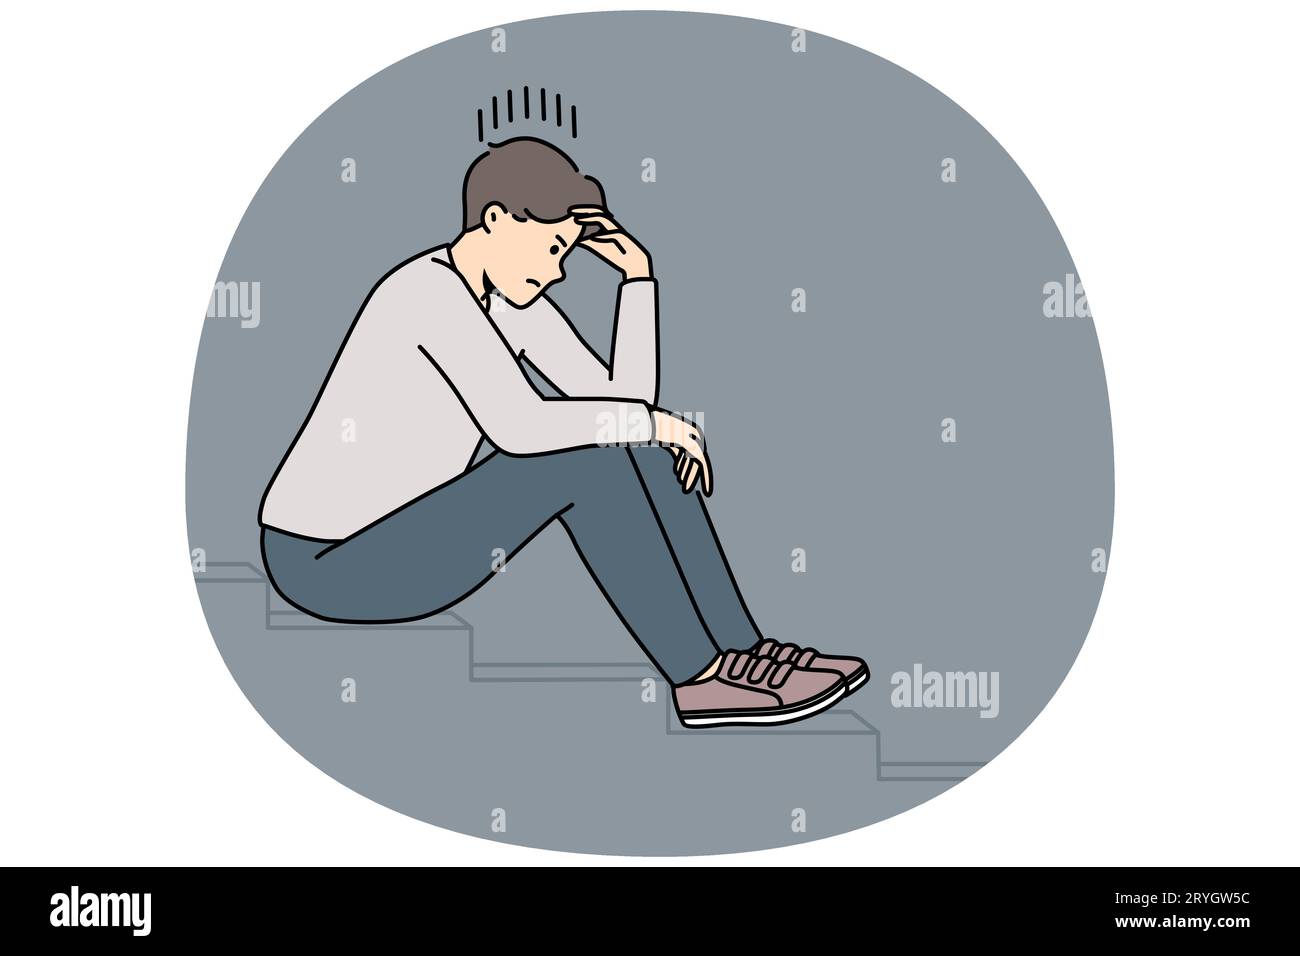 Stressed man sit on stairs thinking or making plan. Distressed unhappy guy lost in thoughts having dilemma or issue. Vector illustration. Stock Vector